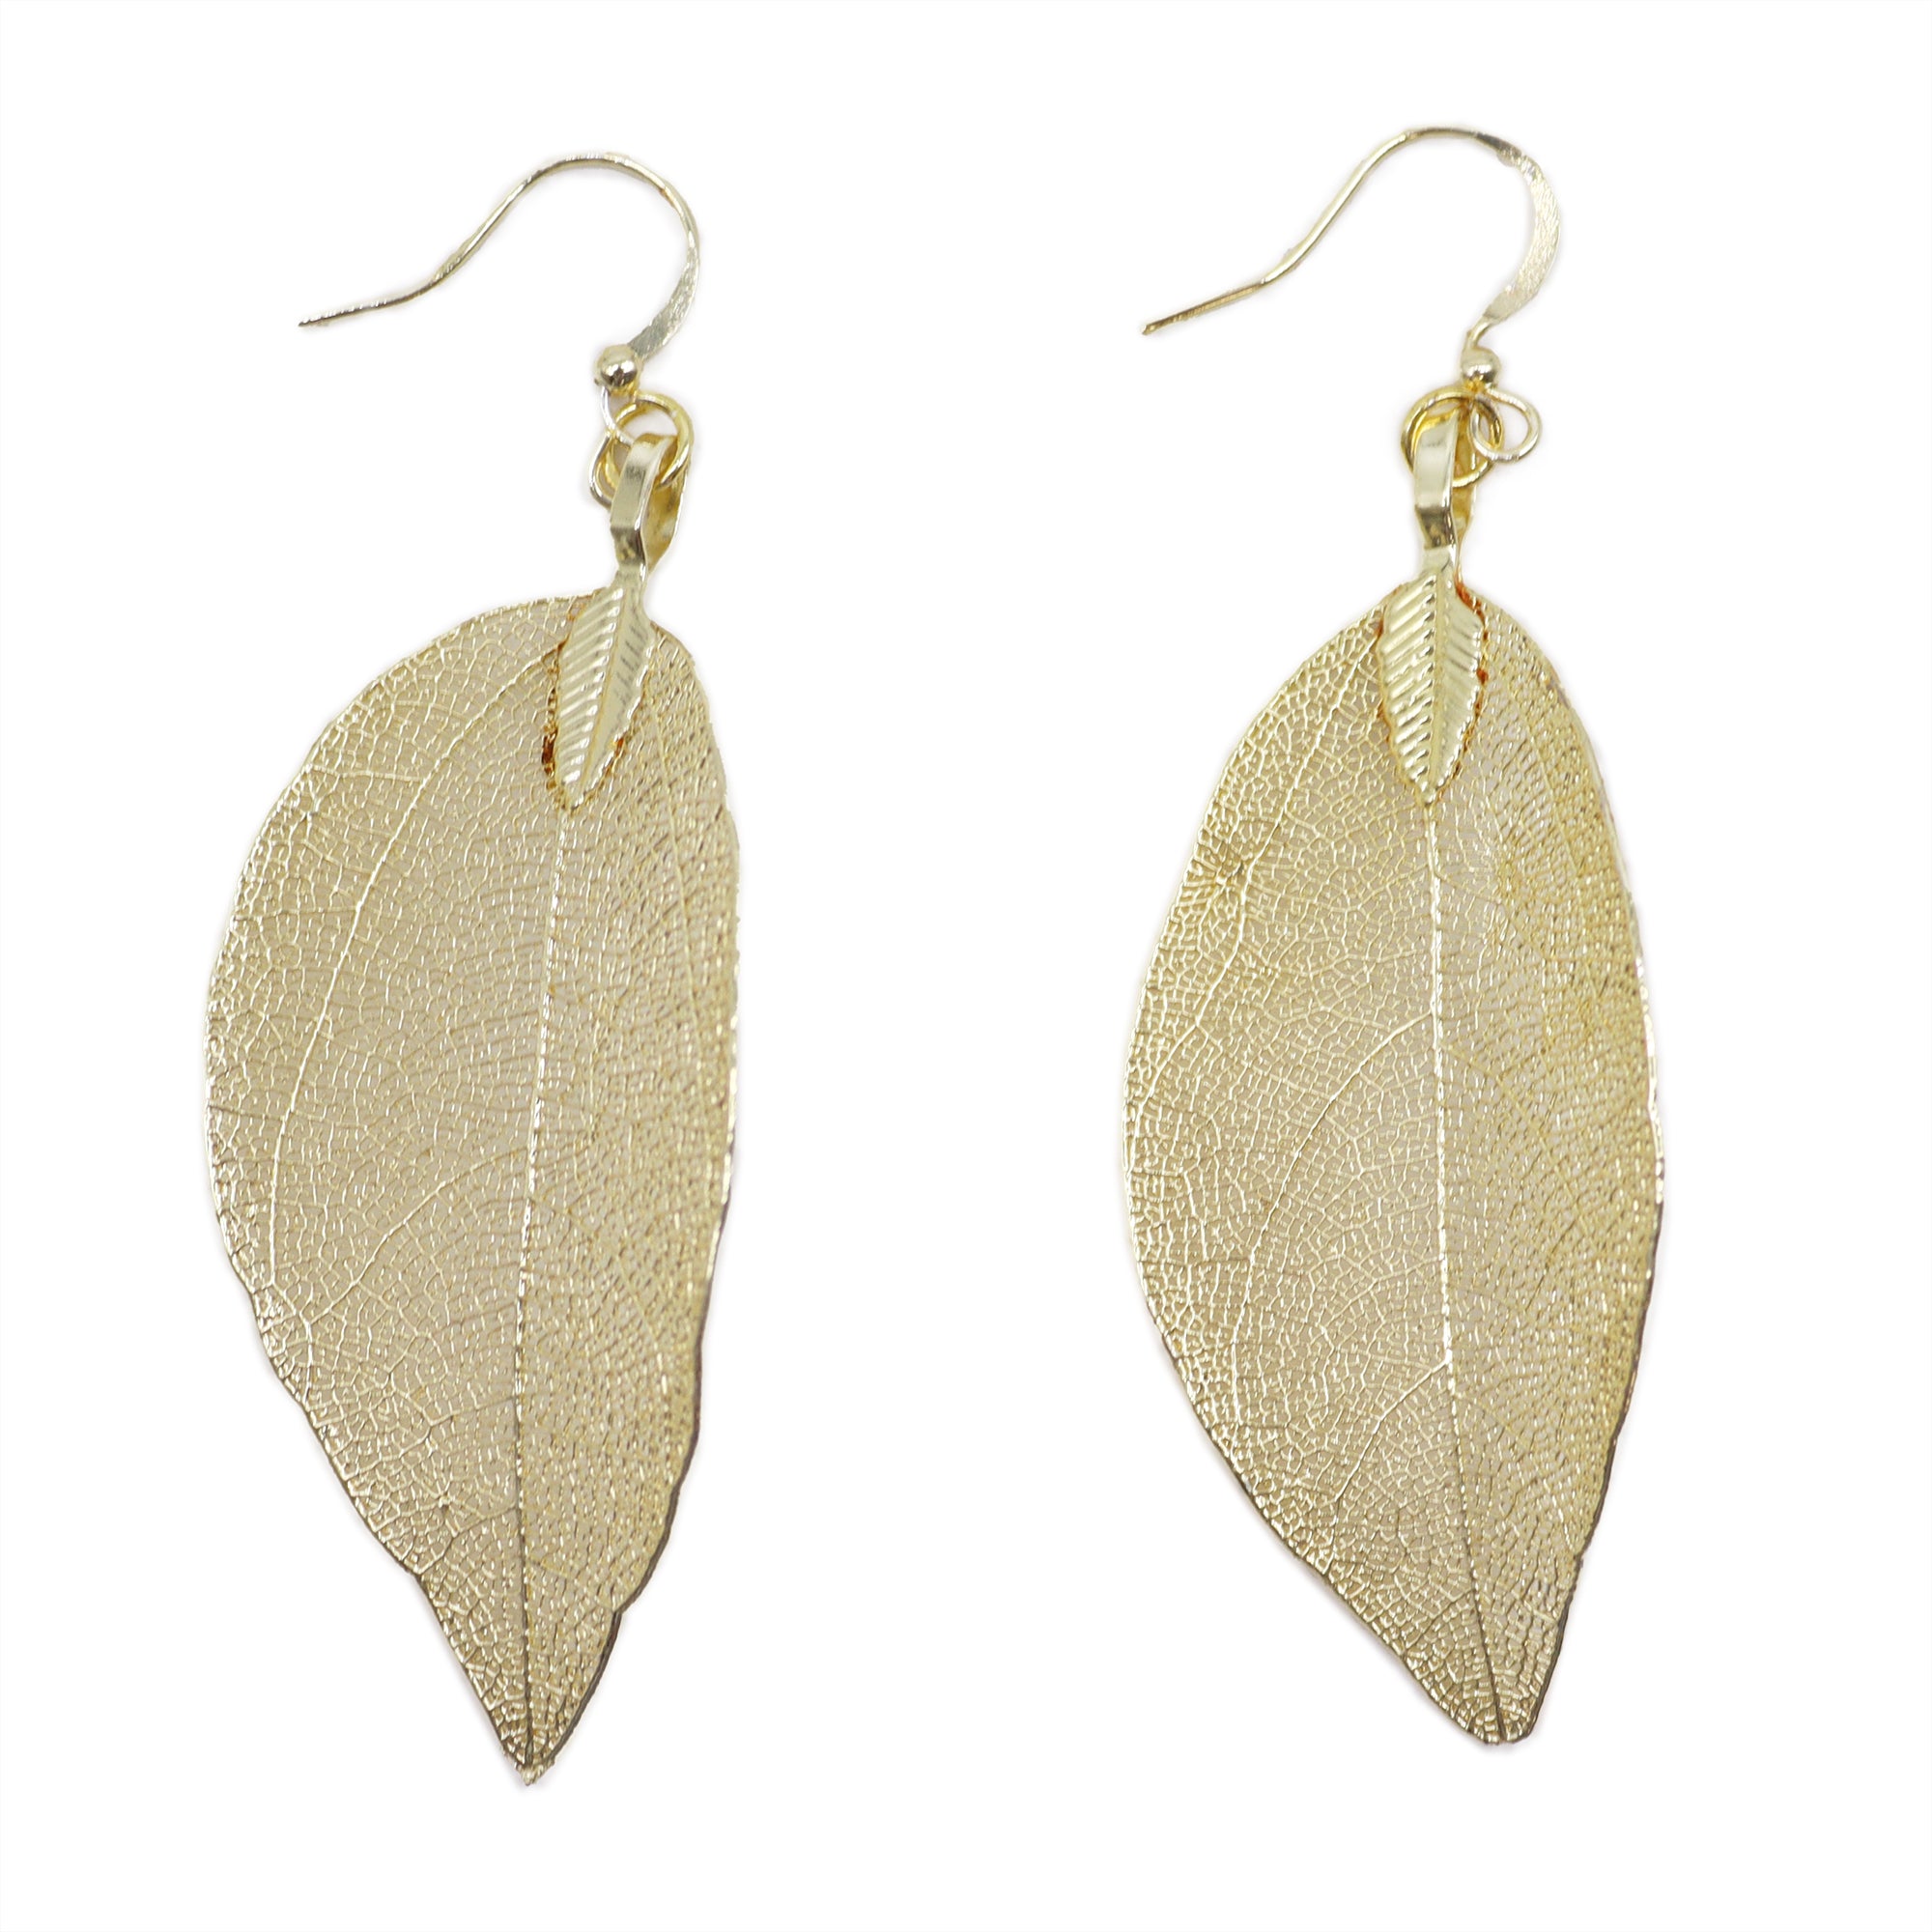 View Earrings Bravery Leaf Gold information